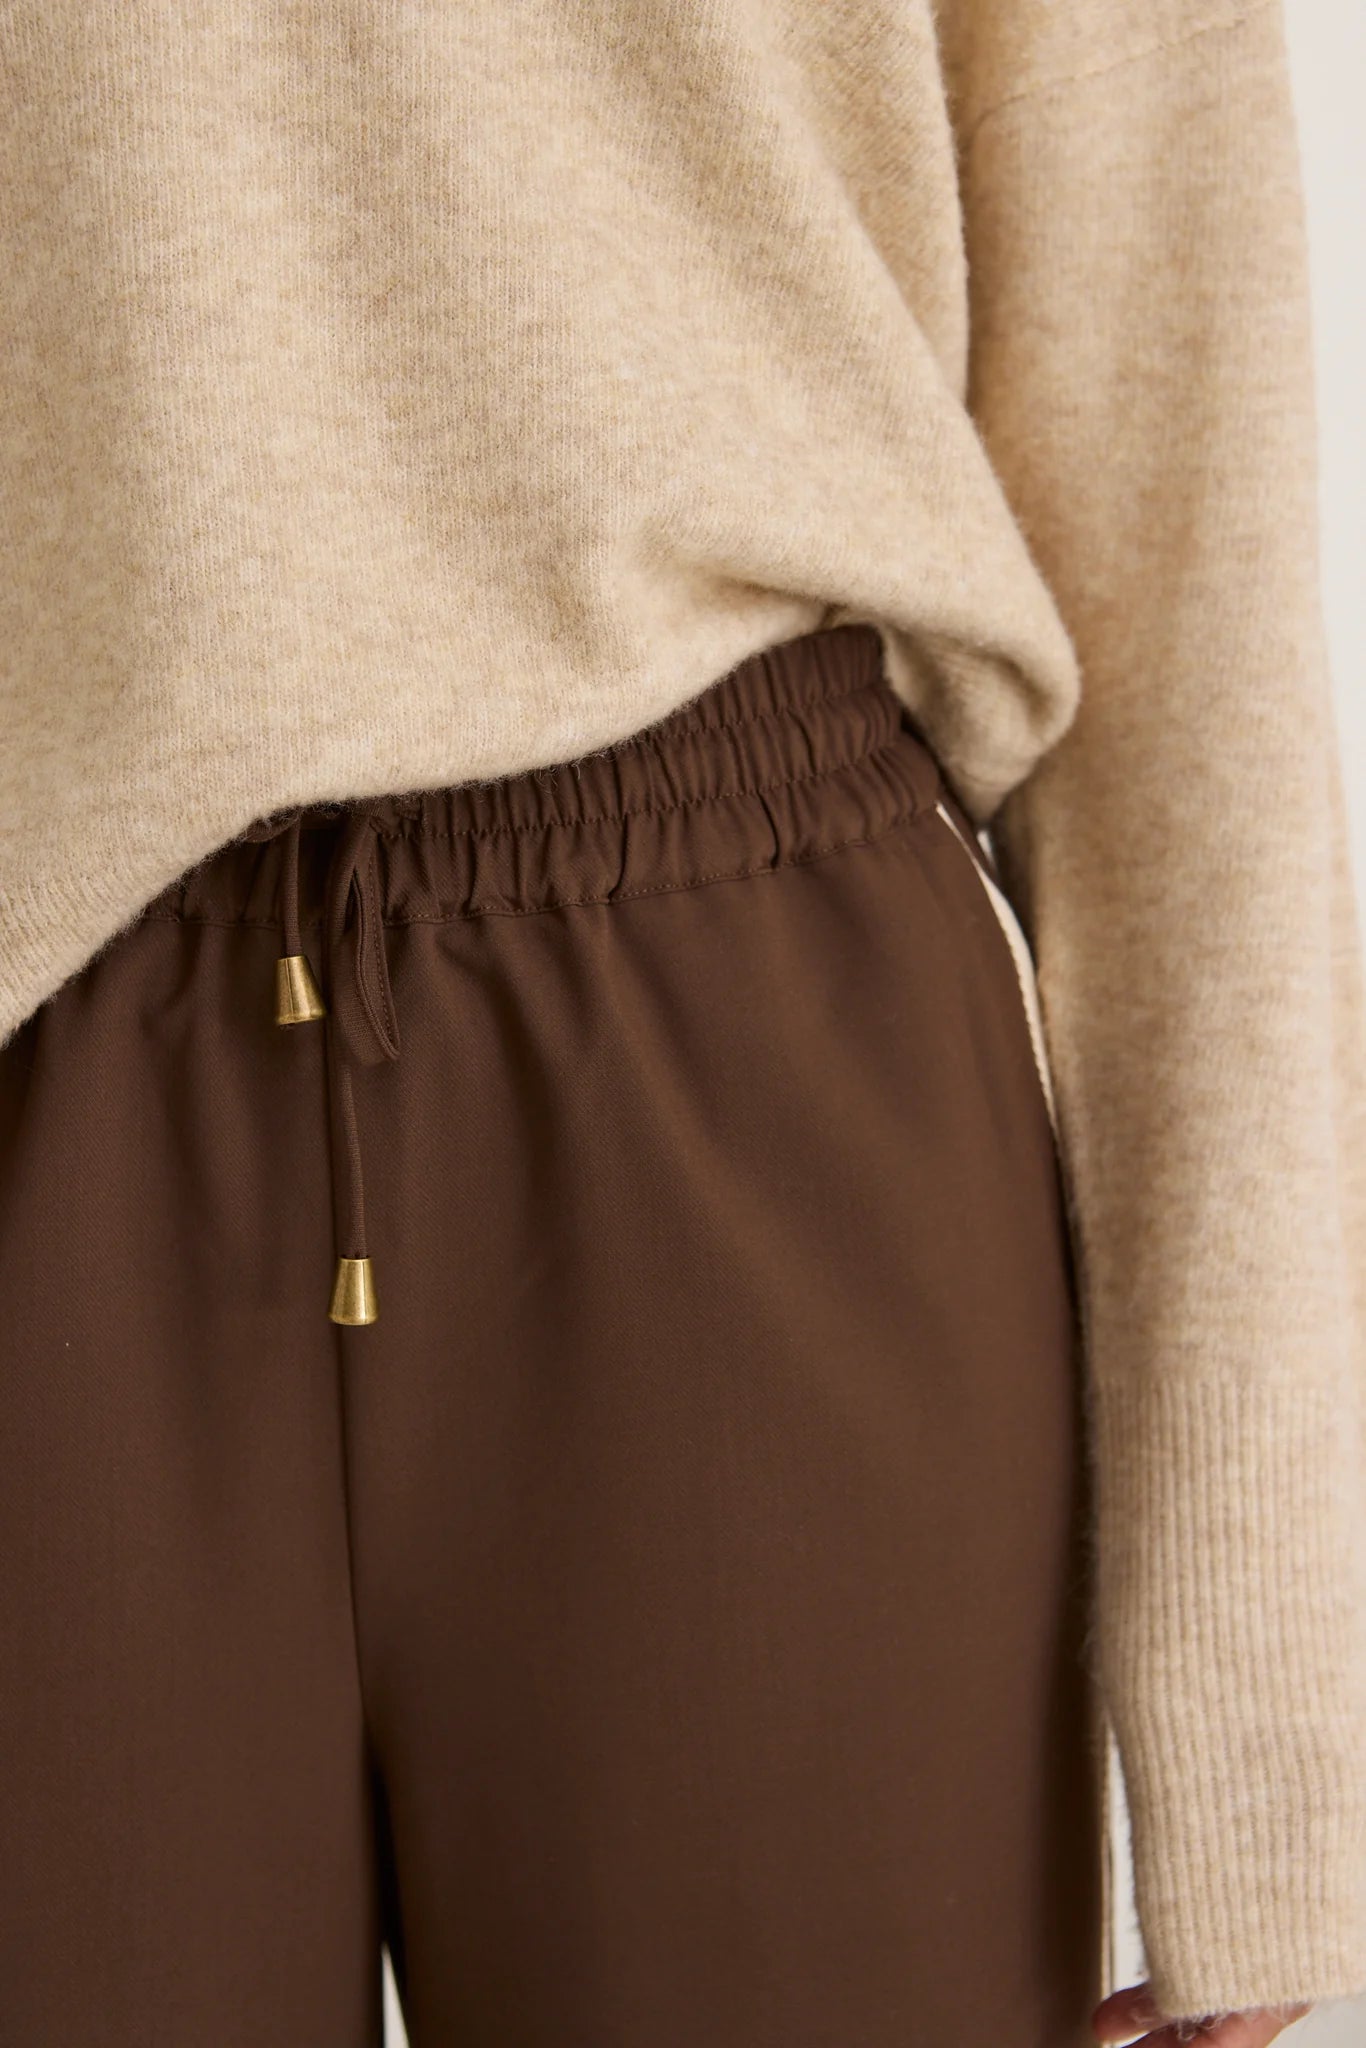 STORIES BE TOLD // Townie Pant CHOCOLATE